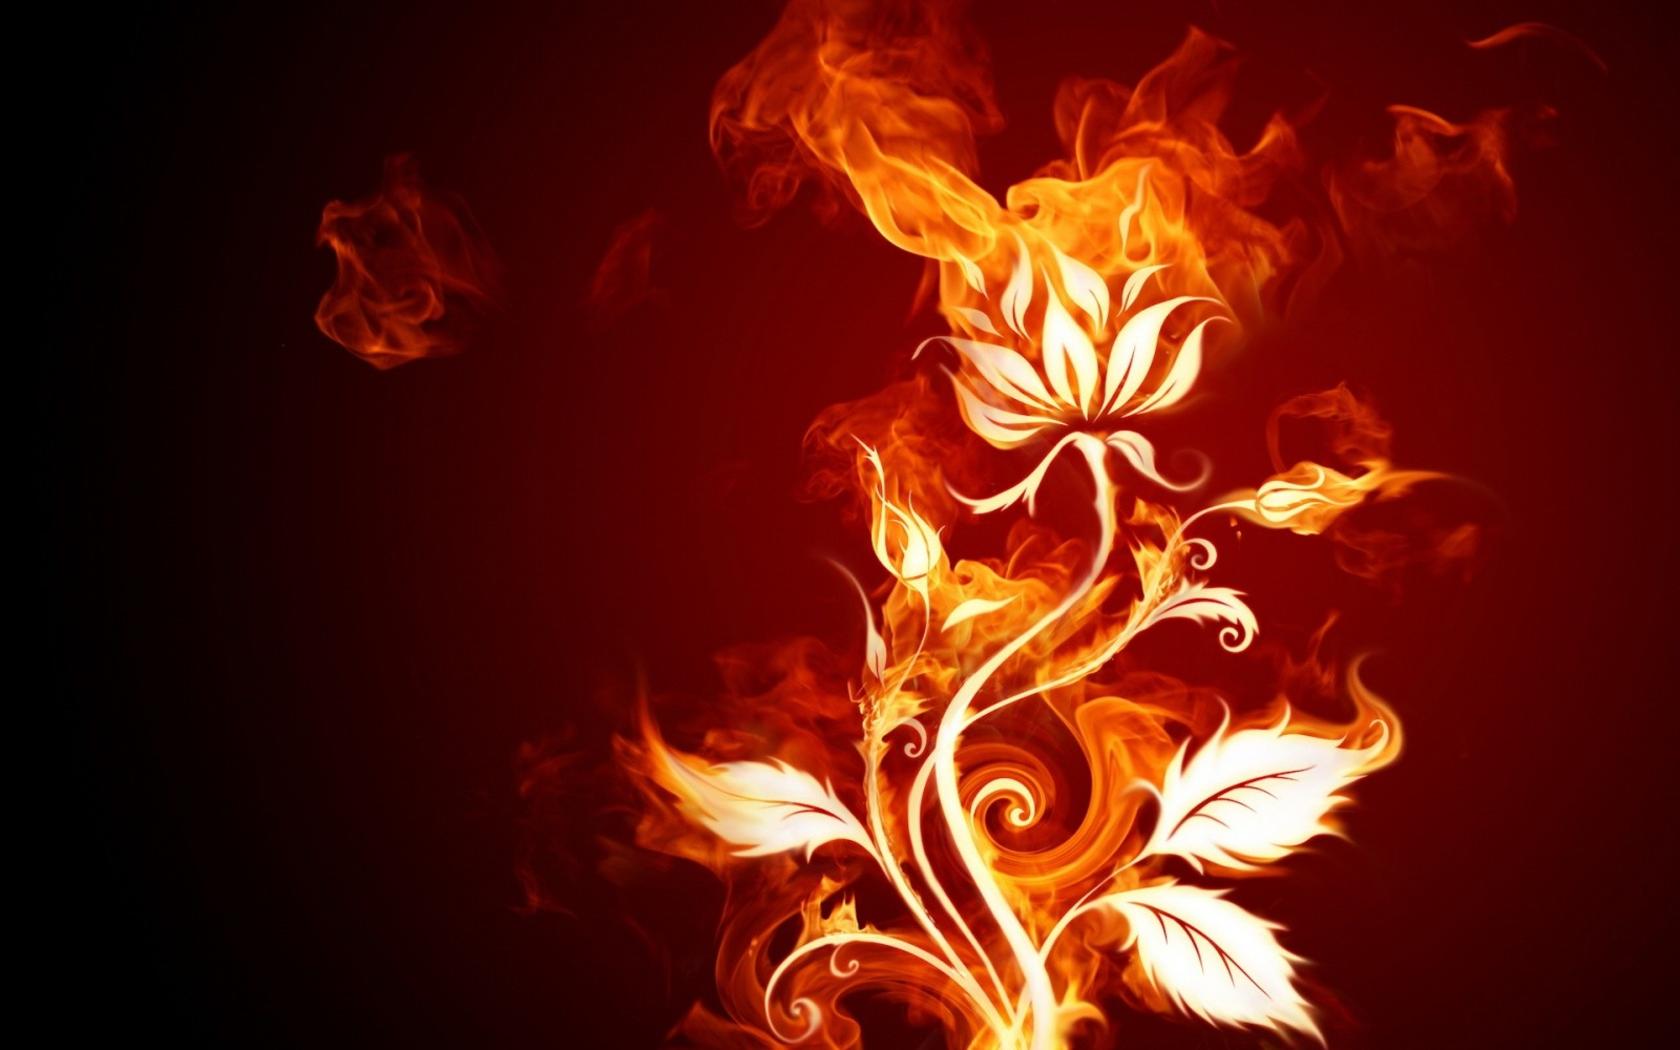 Fire Widescreen hd Wallpapers | Only hd wallpapers